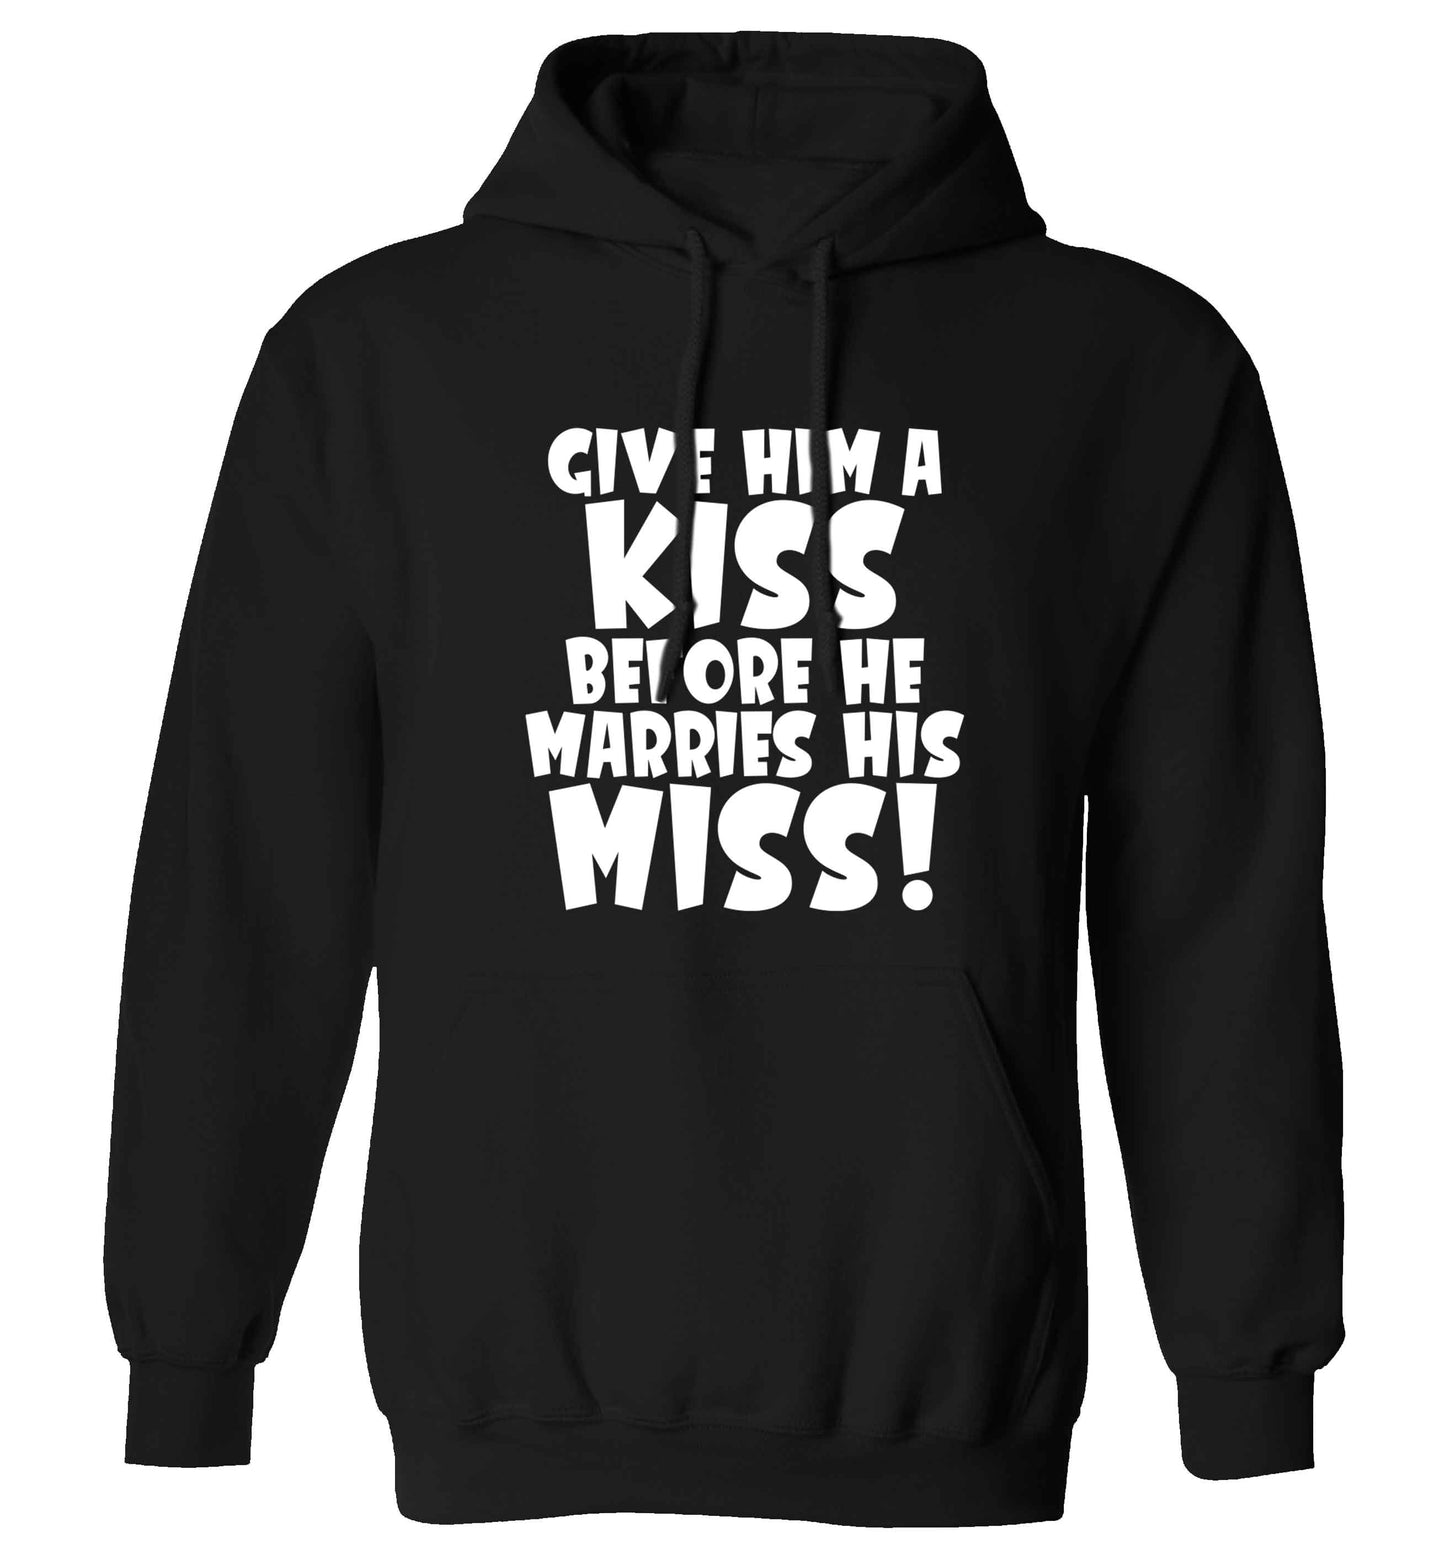 Give him a kiss before he marries his miss adults unisex black hoodie 2XL